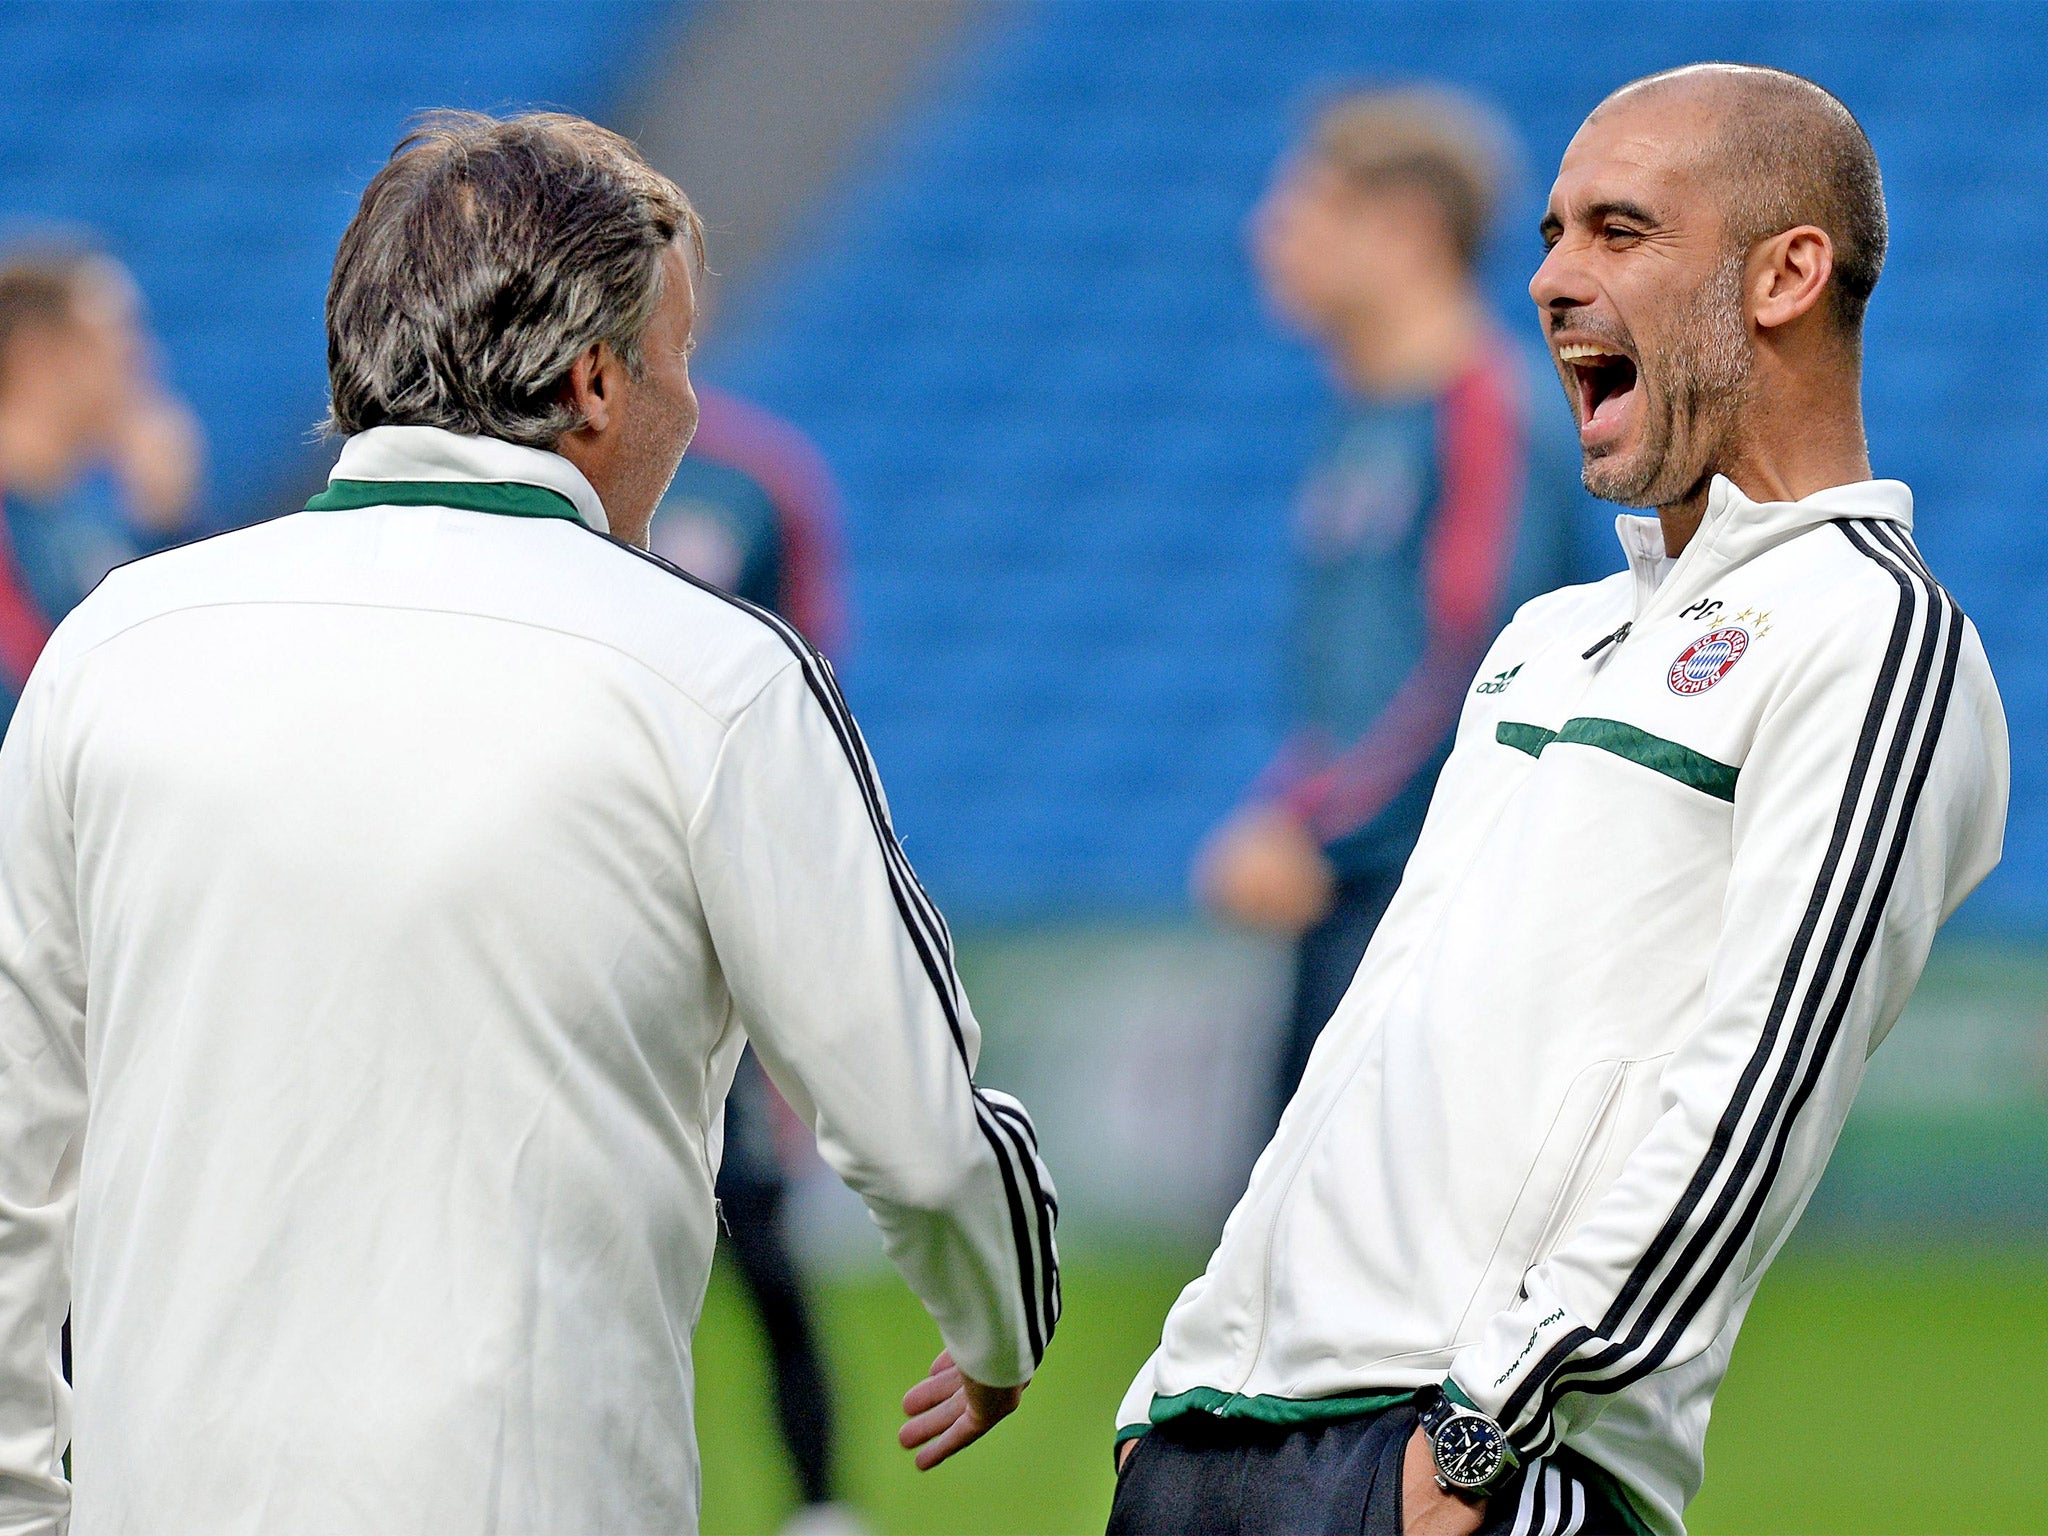 Pep Guardiola shares a joke with one of his coaches during training at the Etihad Stadium